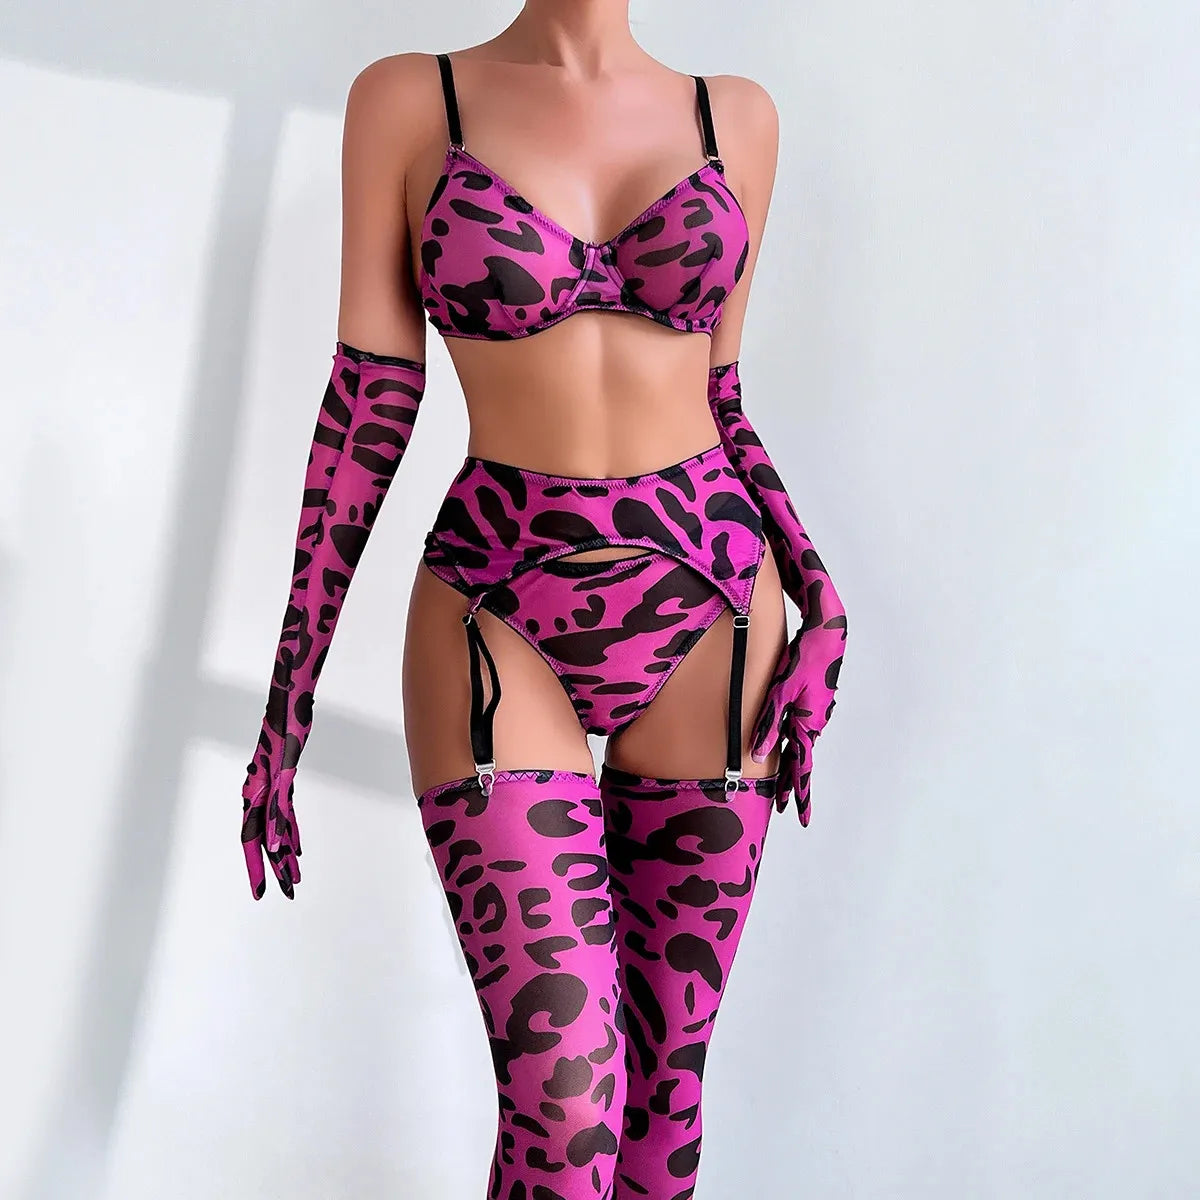 "Sunset Magenta Seduction: MALWear Hentai Leopard Lingerie Attire – Set the scene for passion with this sunset orange lingerie, merging Asian tradition with modern allure. Shop now for an irresistible allure."